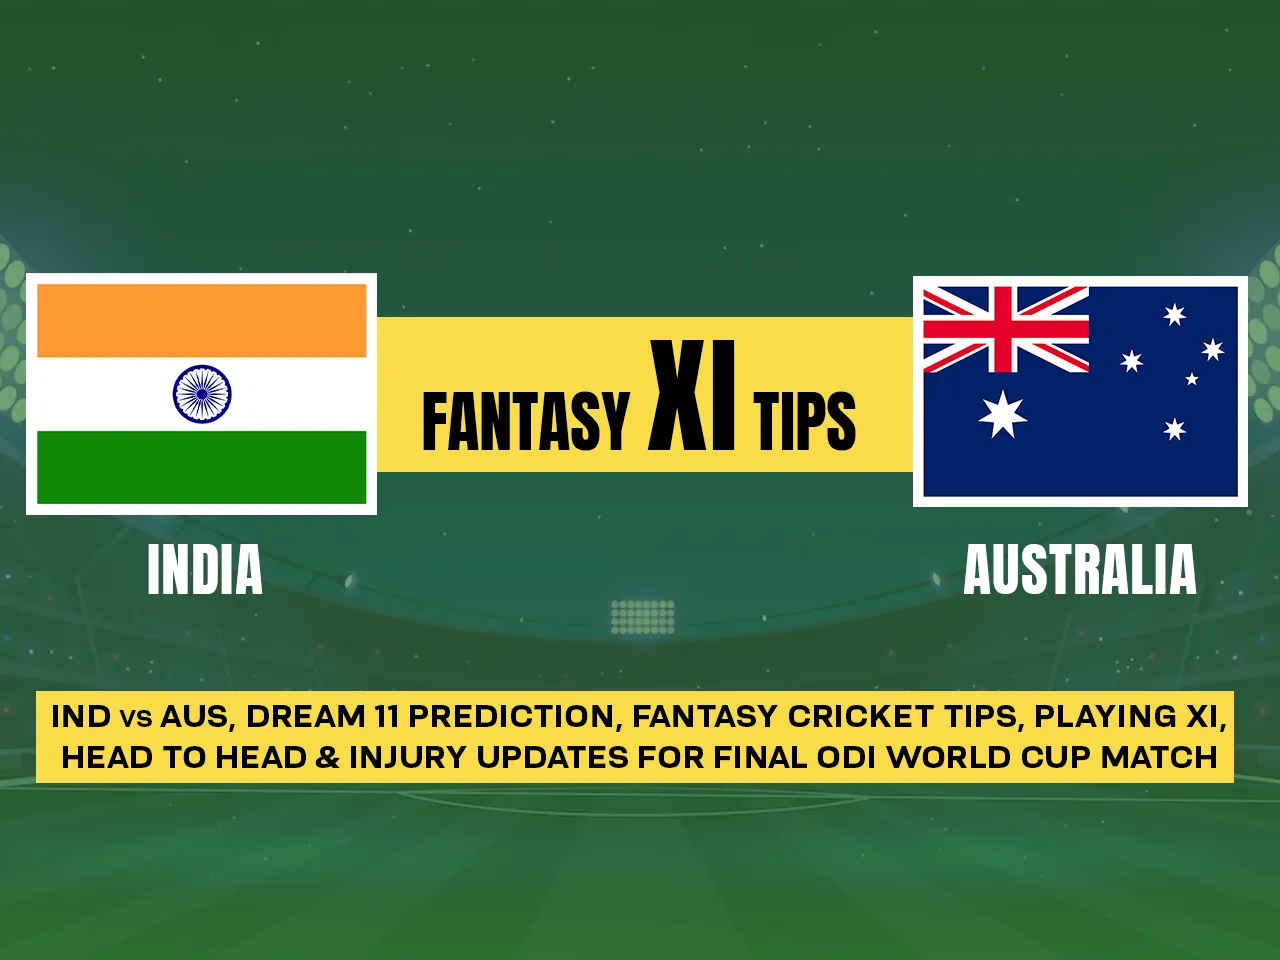 ODI Cricket World Cup 2023: IND vs AUS Dream11 Prediction, Playing XI, Head-to-Head Stats, and Pitch Report for final